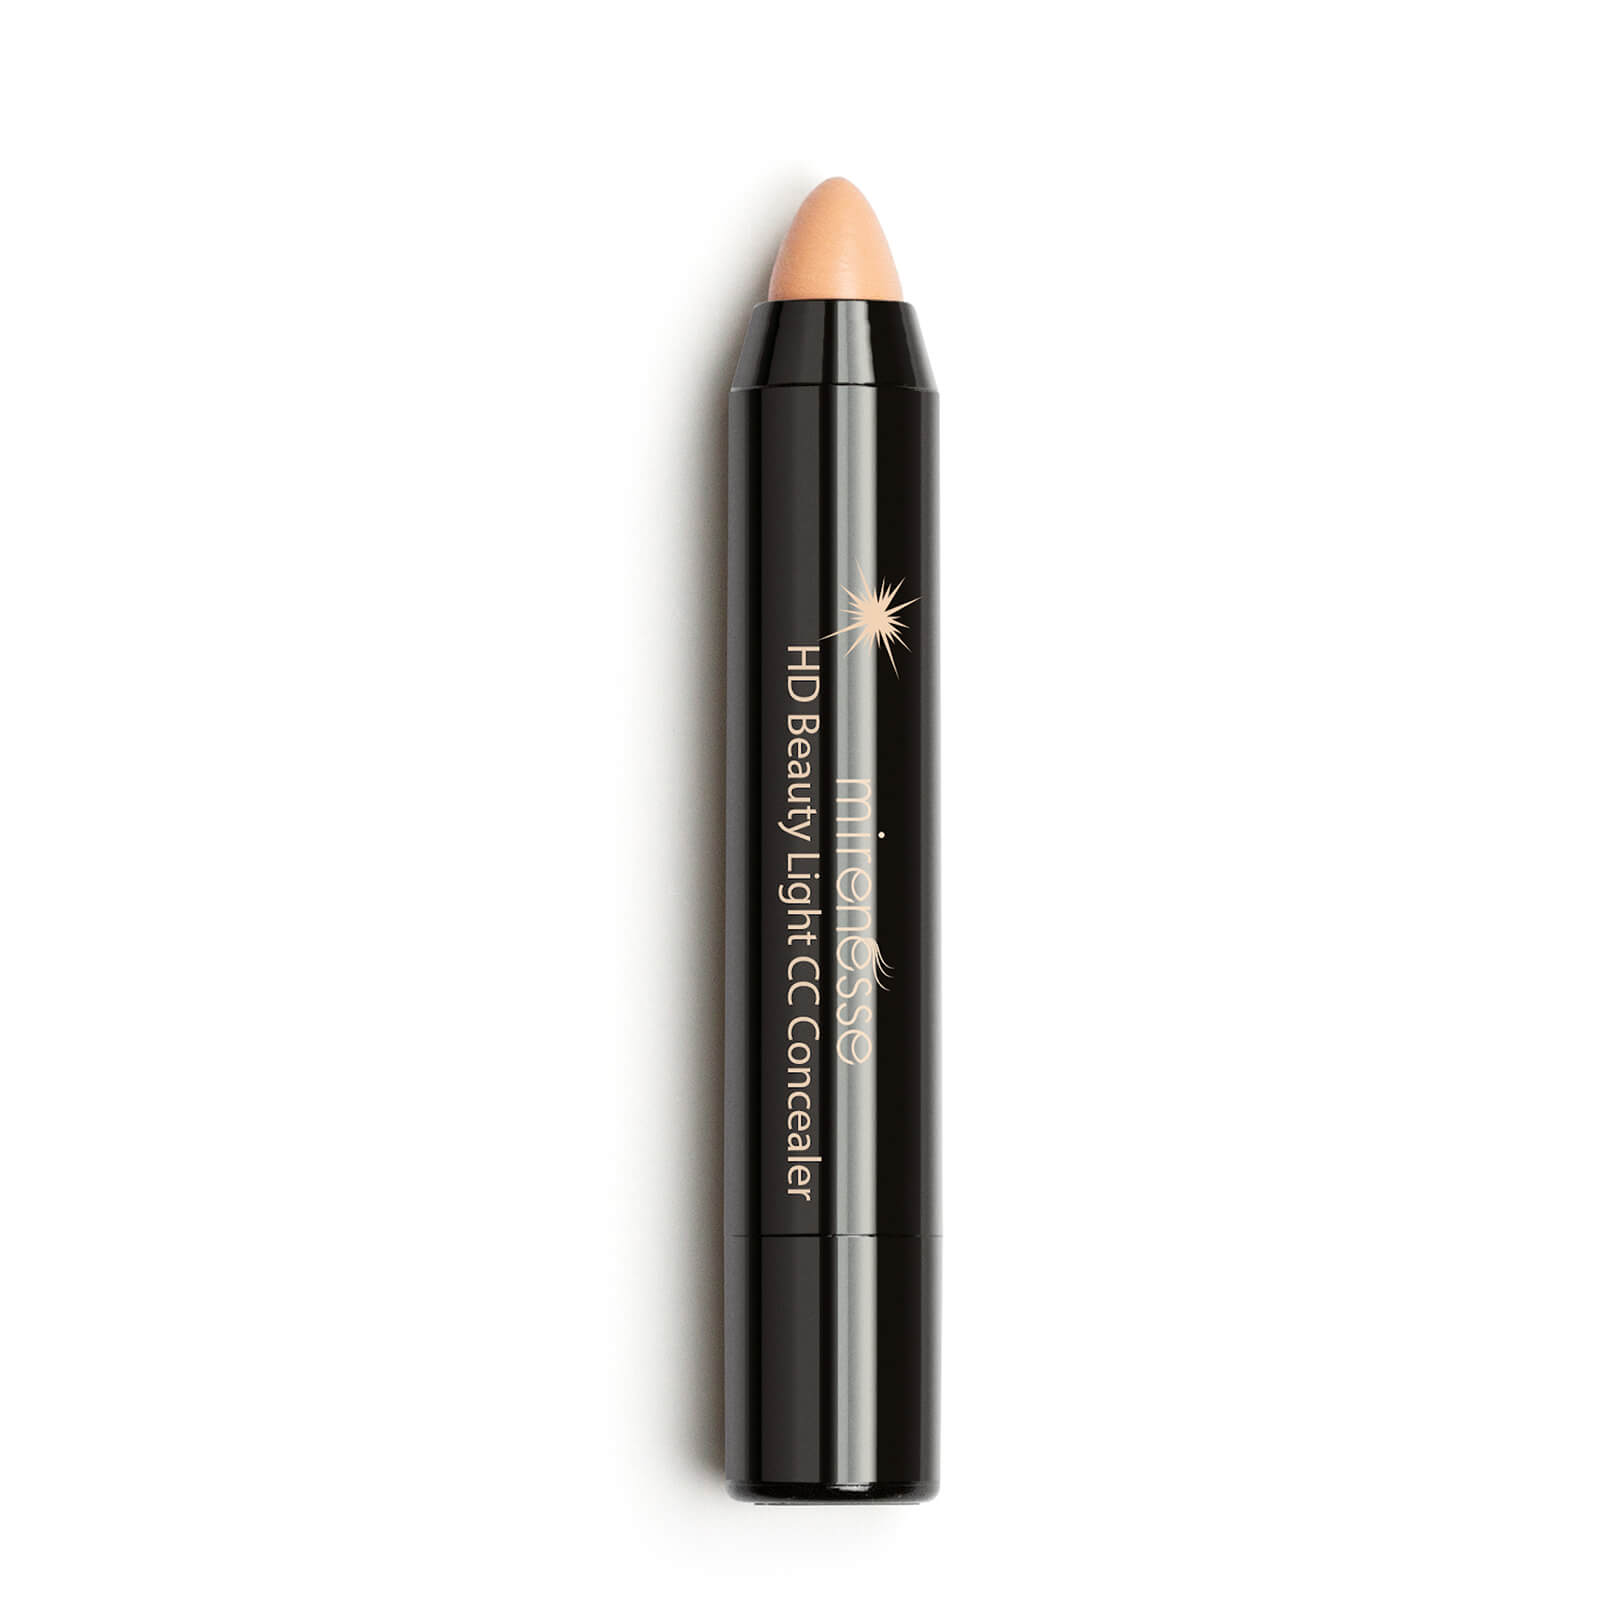 mirenesse HD Beauty Light CC High Coverage Concealer 4g (Various Shades) - Barely Beige